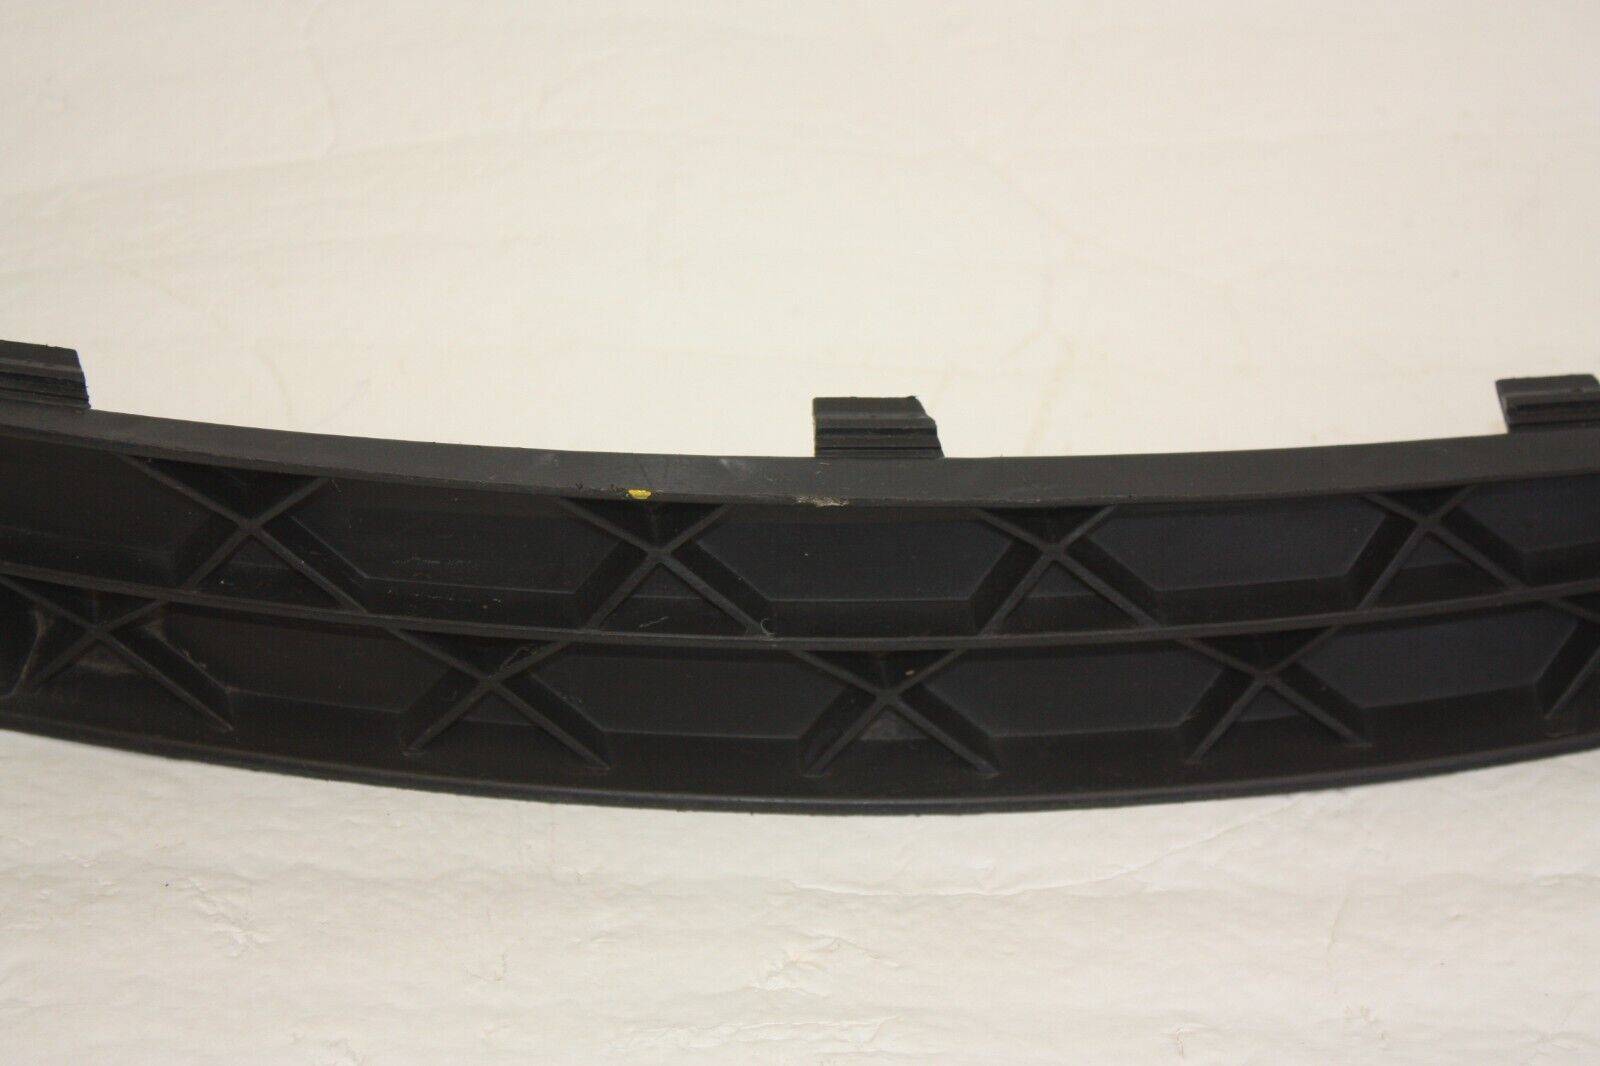 Citroen-C4-Picasso-Front-Bumper-Right-Lower-Grill-2007-TO-2011-9680403277-176254461016-3